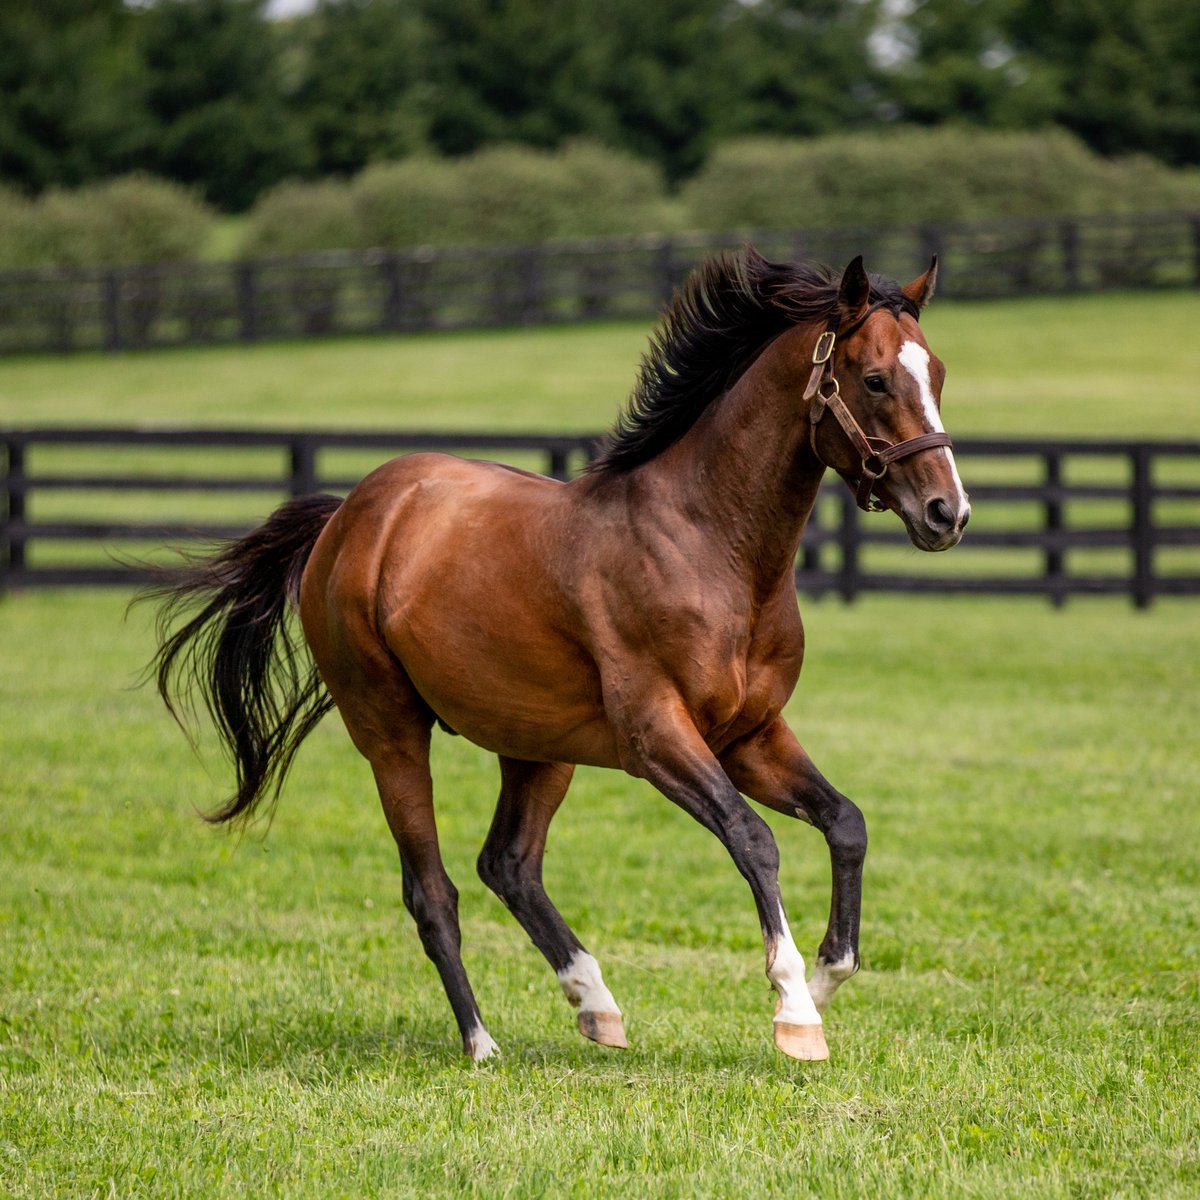 Authentic 🌹 The 2020 #KyDerby winner stands as a stallion at Spendthrift Farm in Lexington, Kentucky.